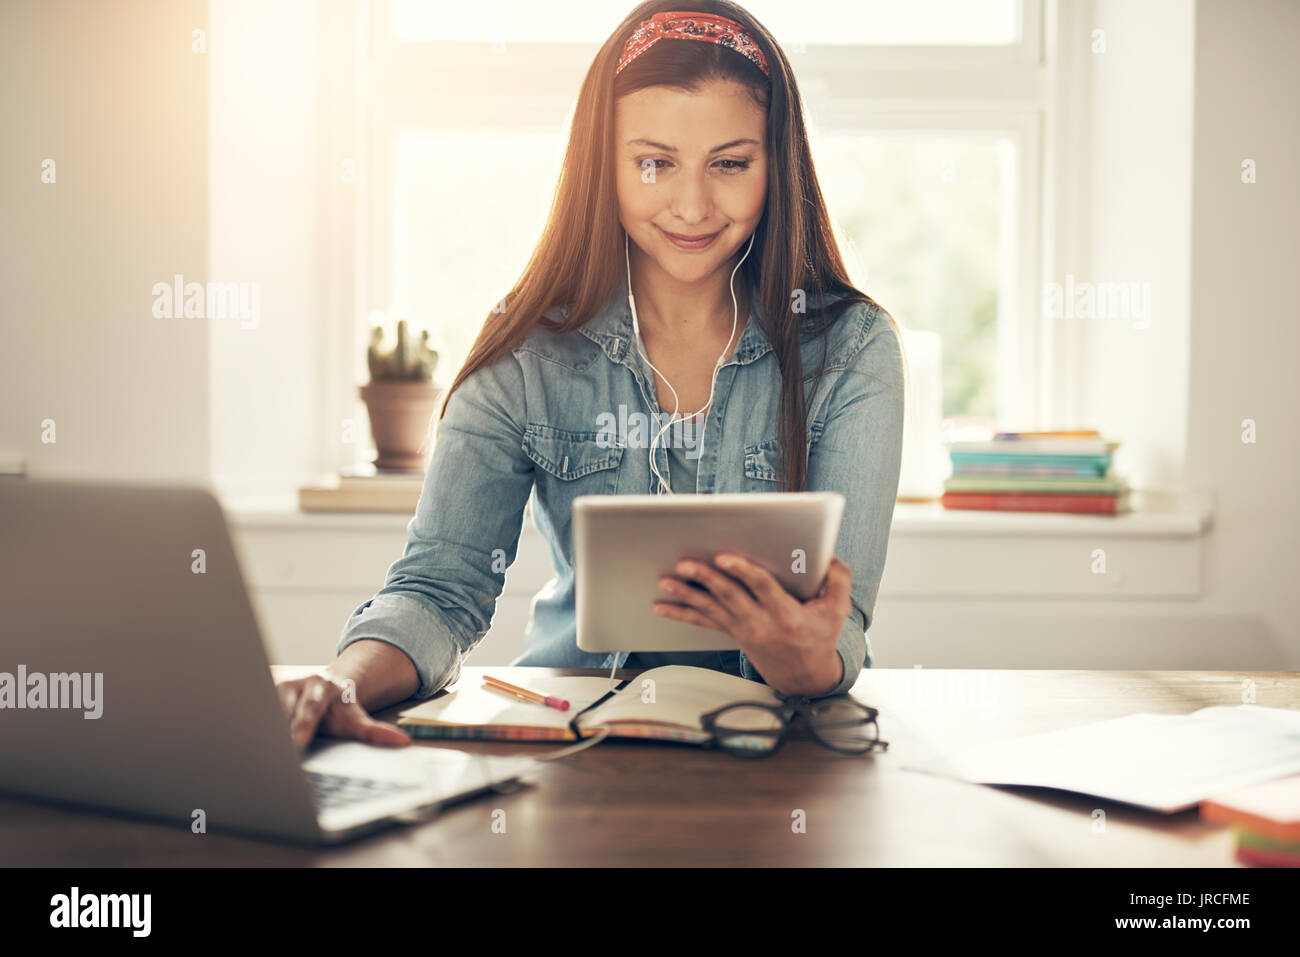 Smiling young entrepreneur woman wearing earphones and browsing tablet while sitting at laptop in office. Stock Photo